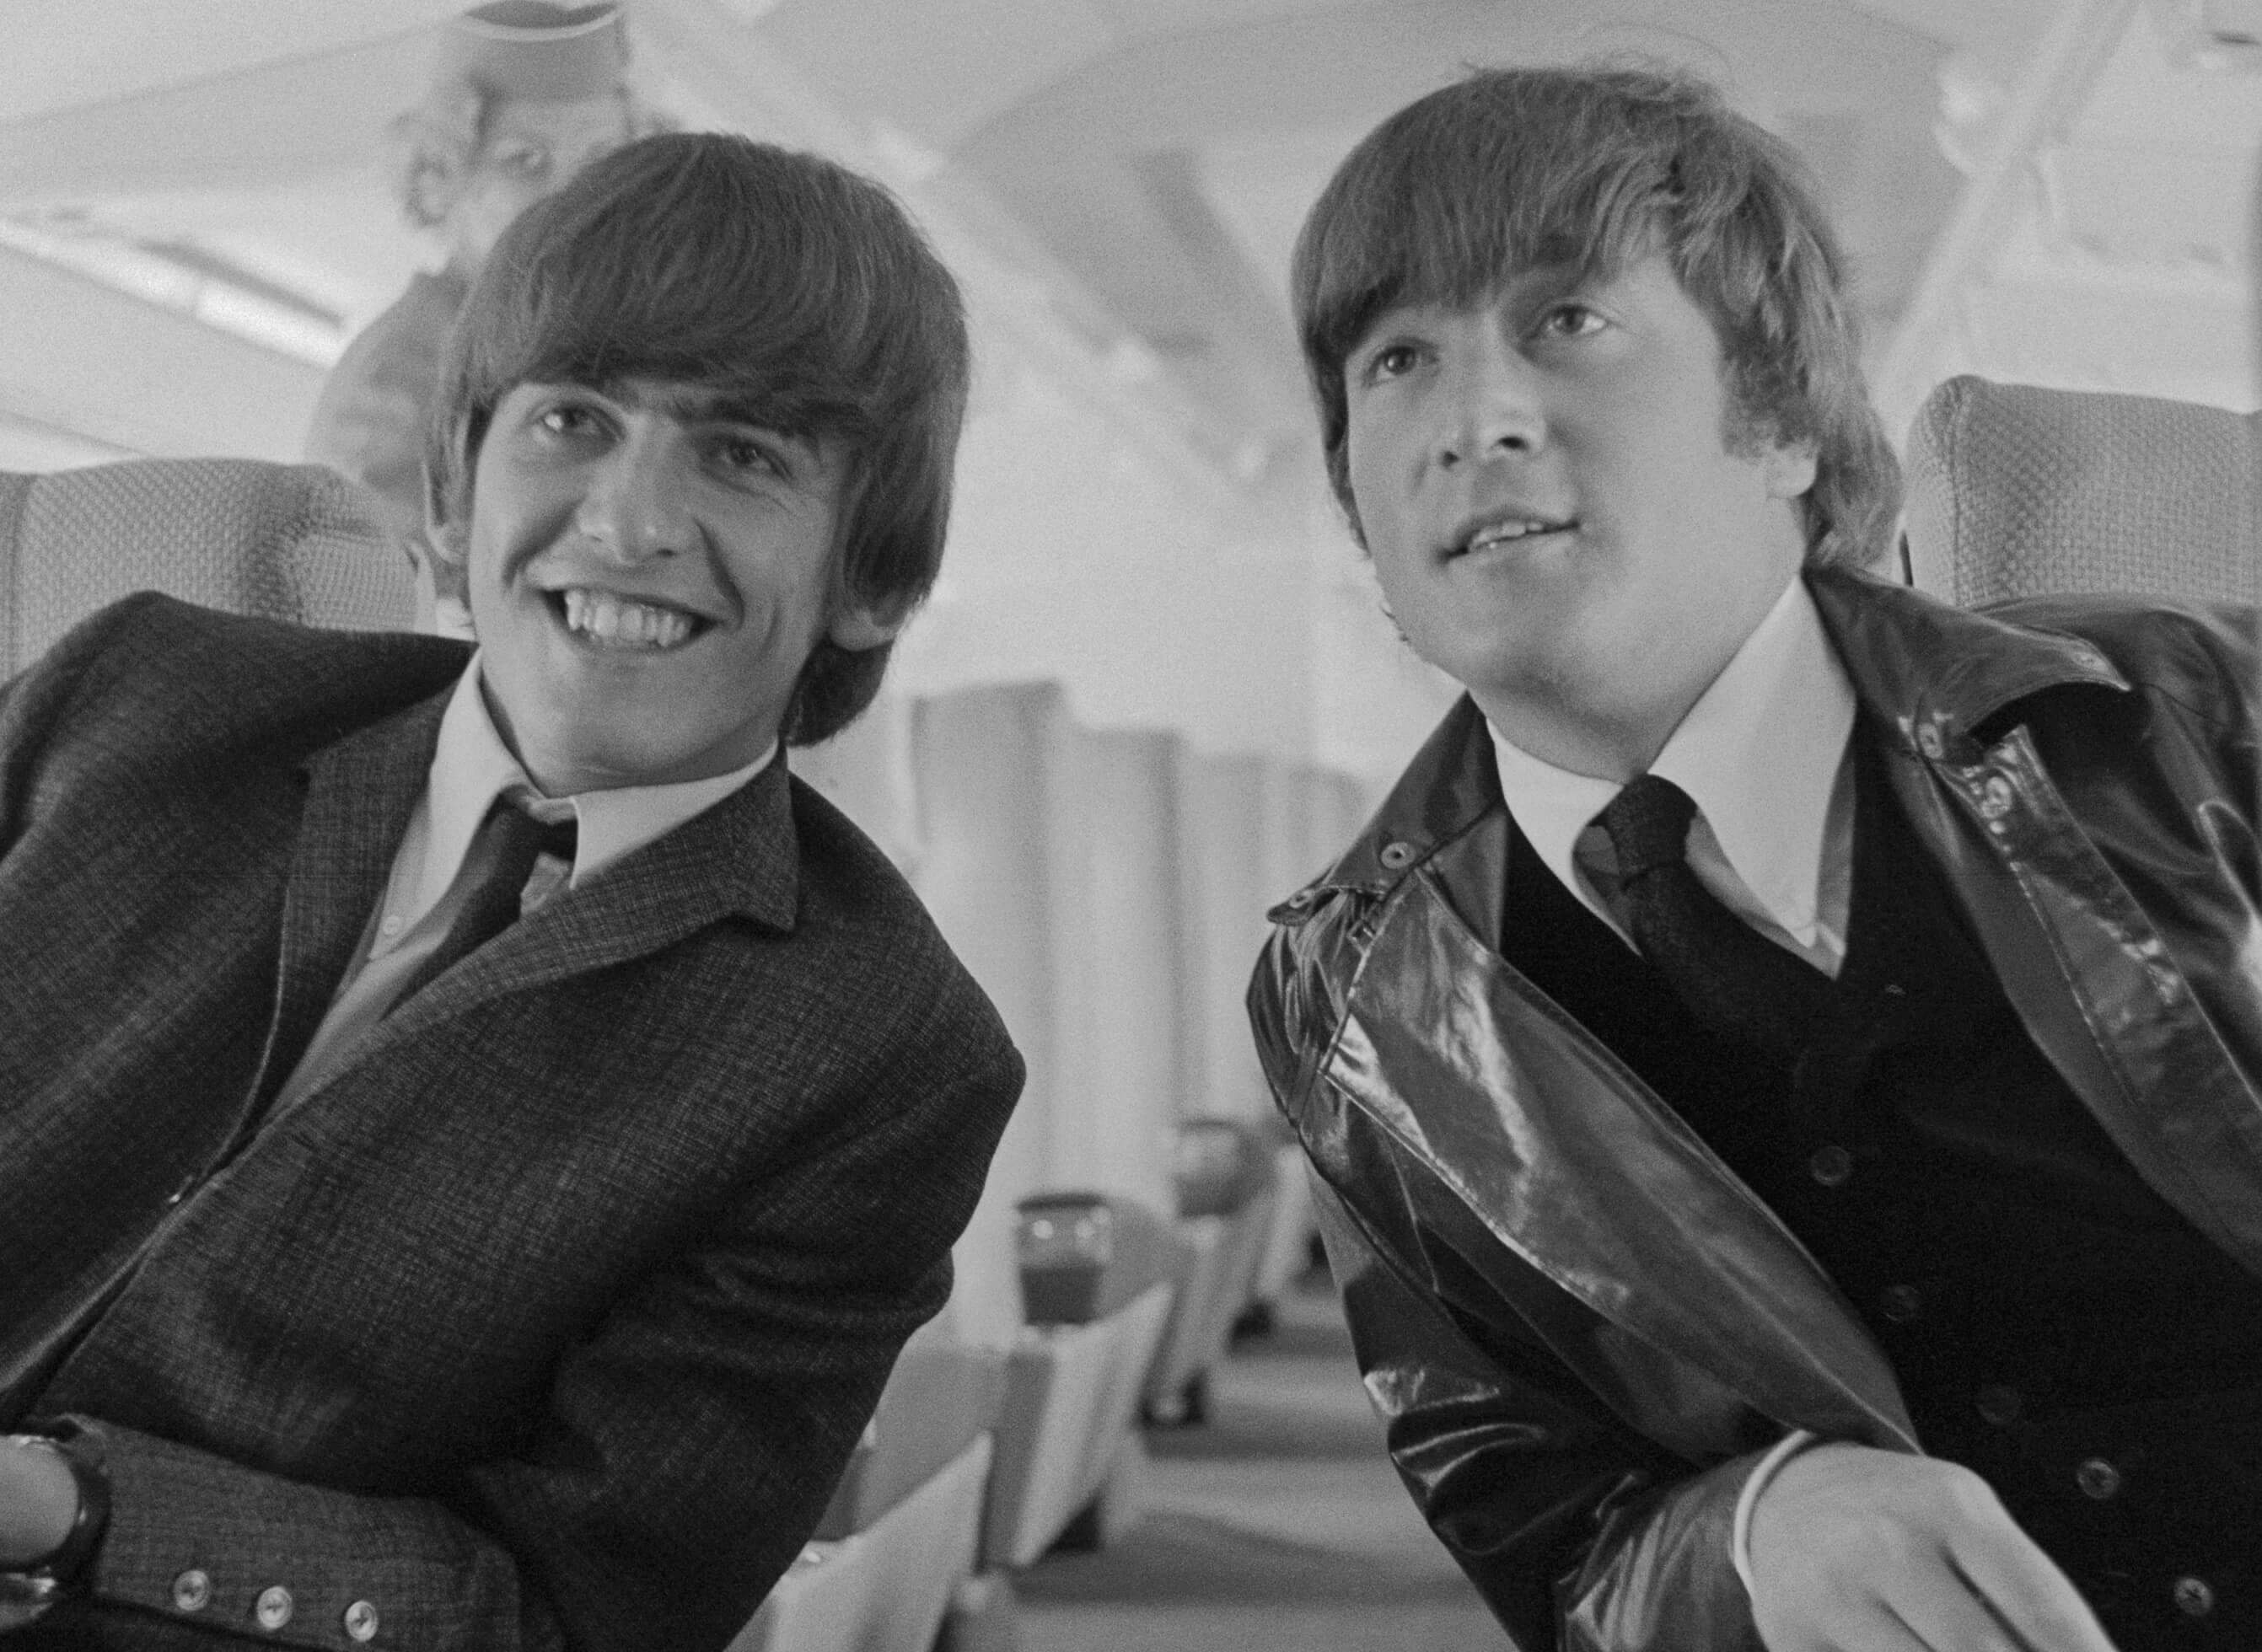 Classic rock stars George Harrison and John Lennon in black-and-white